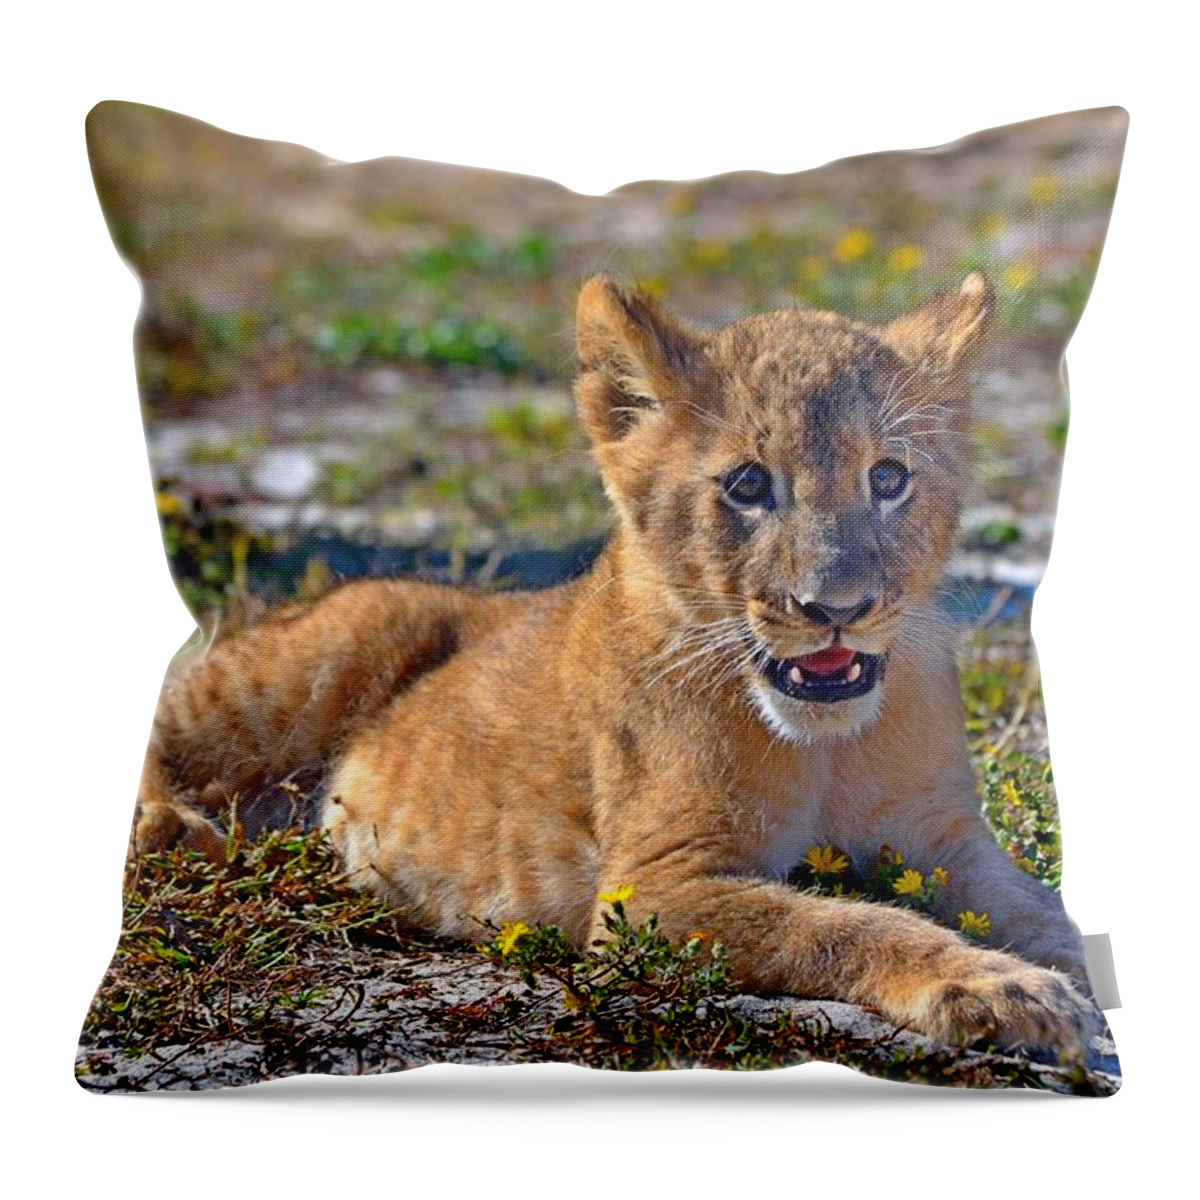 Zootography Throw Pillow featuring the photograph Zootography3 Zion the Lion Cub Posing by Jeff at JSJ Photography